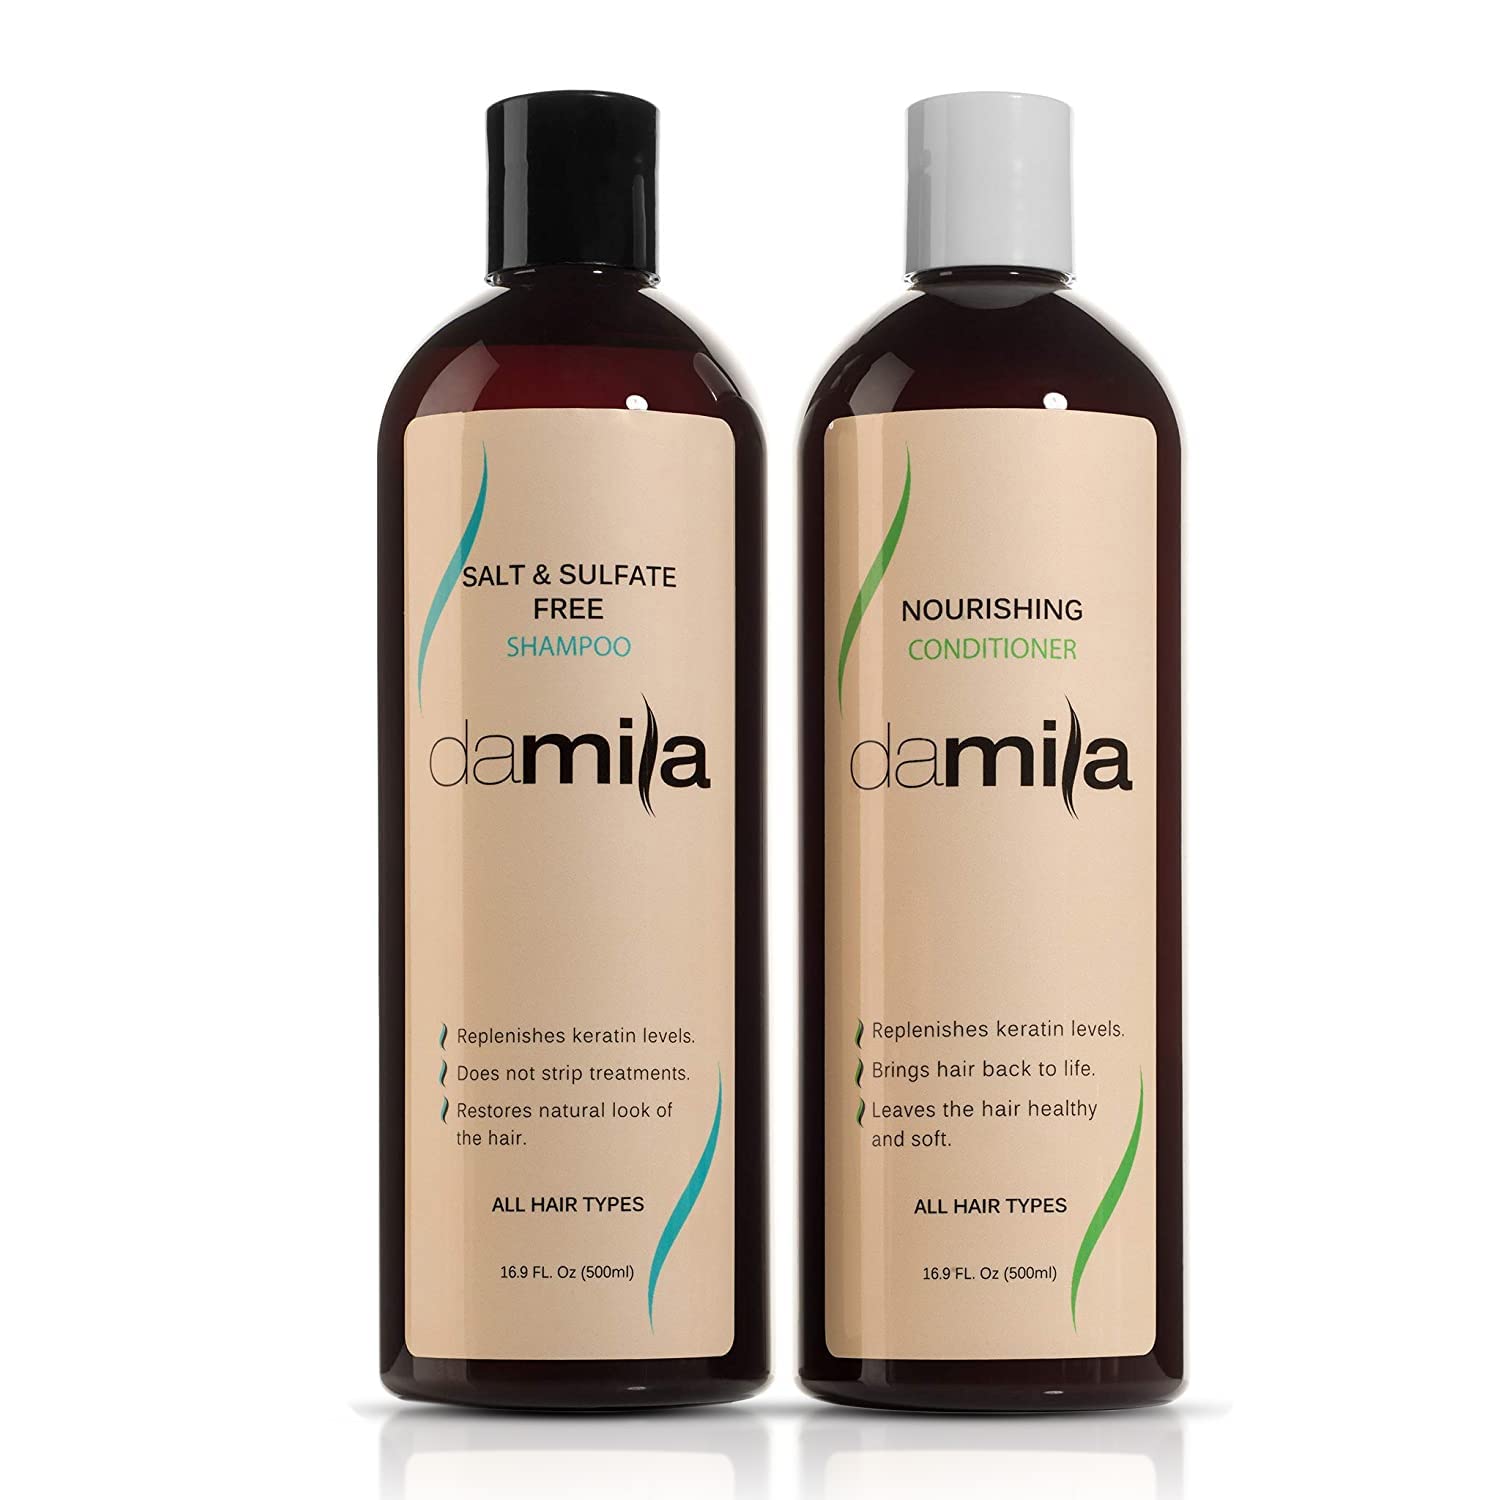 Damila Salt & Sulfate Free Shampoo & Conditioner for Keratin and Color Treated Hair